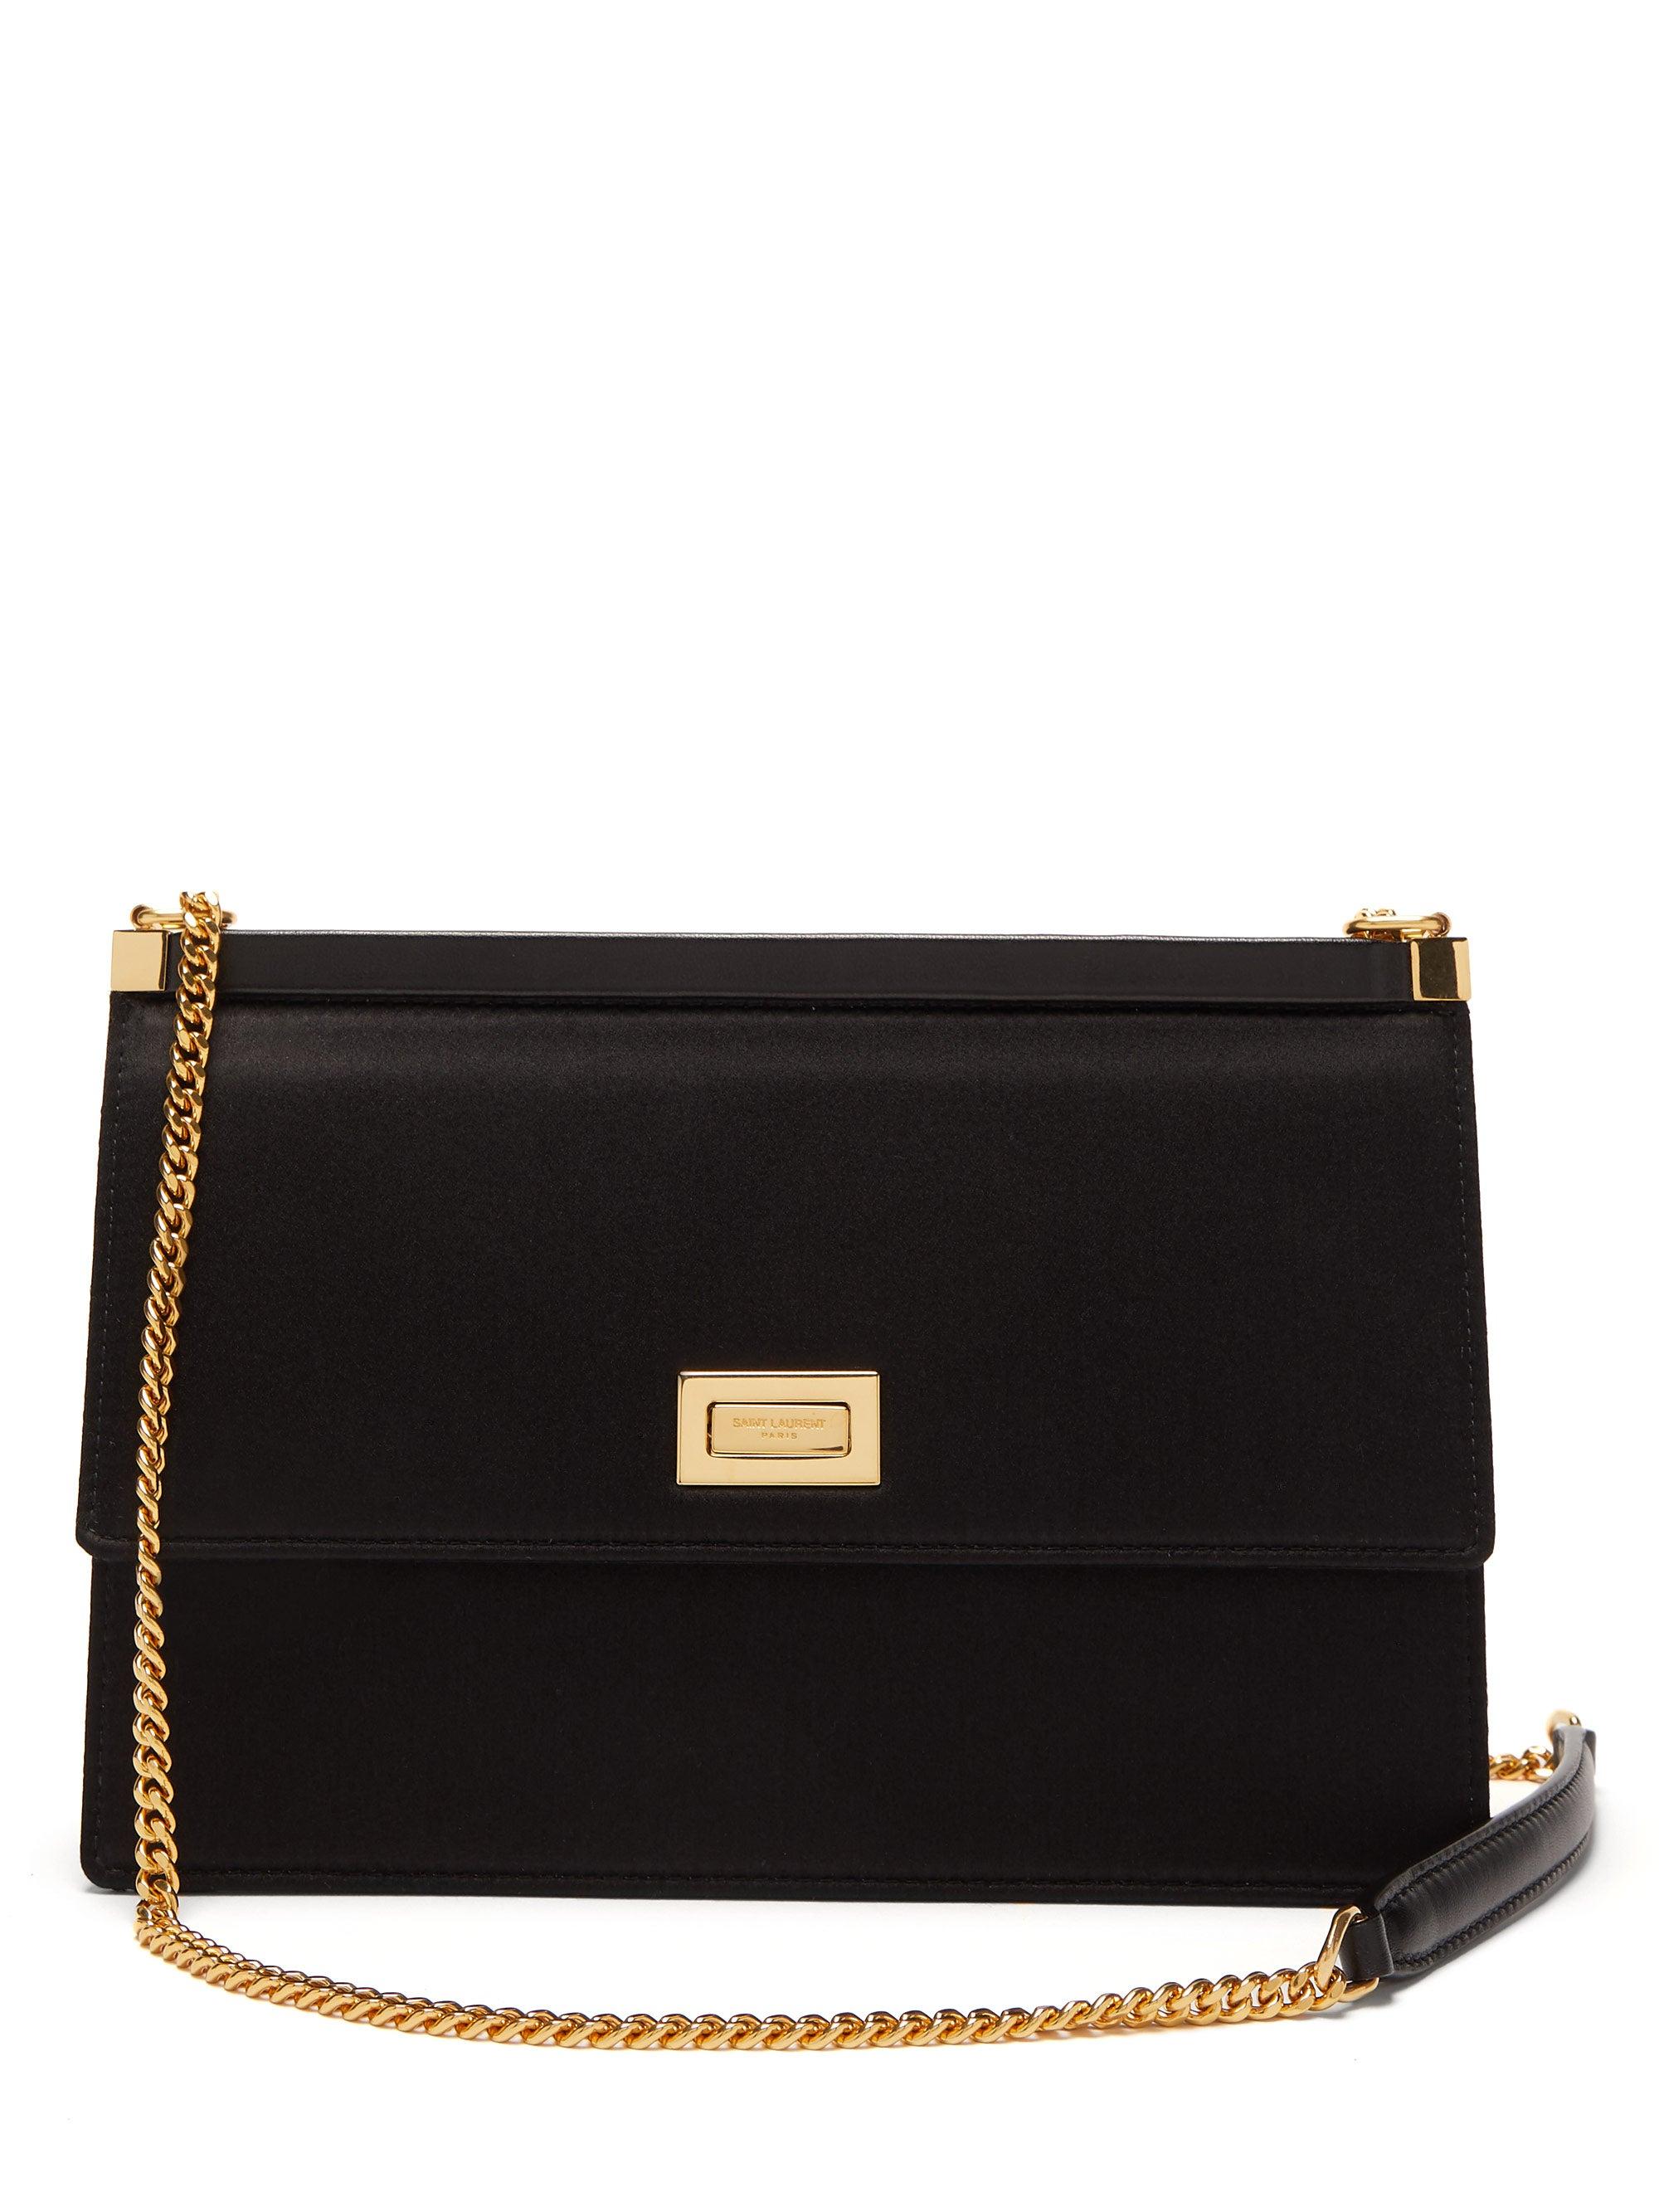 Saint Laurent Logo-clasp Satin And Leather Cross-body Bag in Black | Lyst